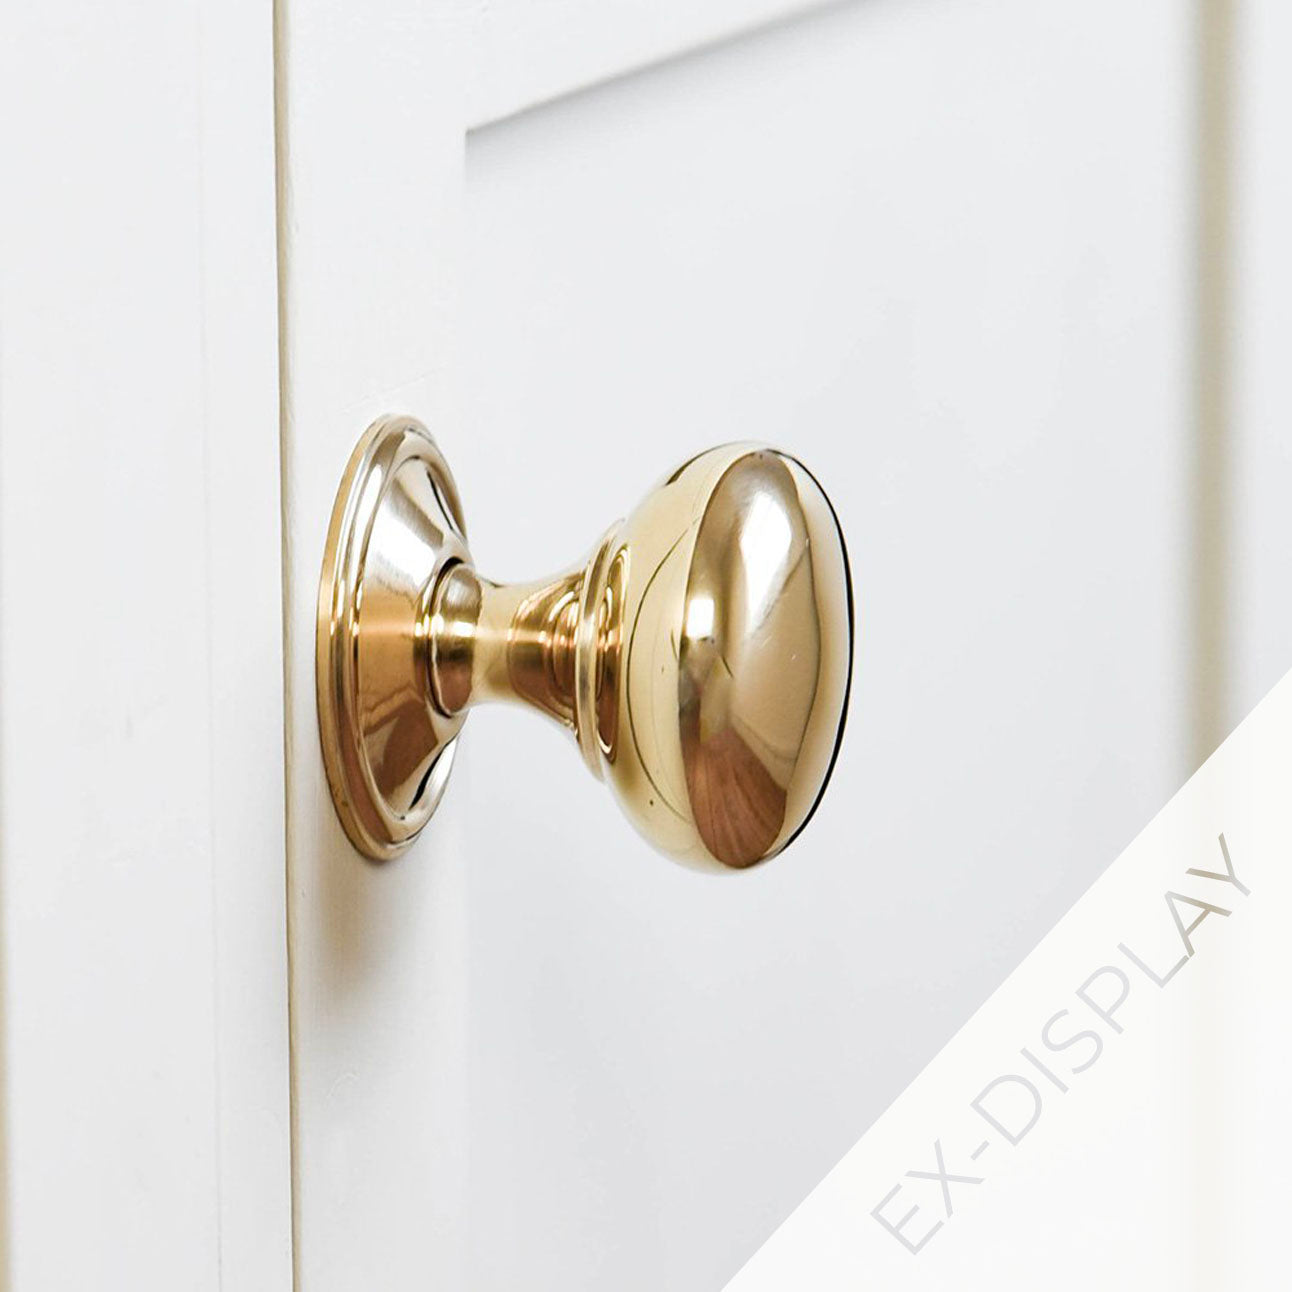 Polished brass cottage bun cabinet knob on a off-white background with an ex-display watermark in the corner